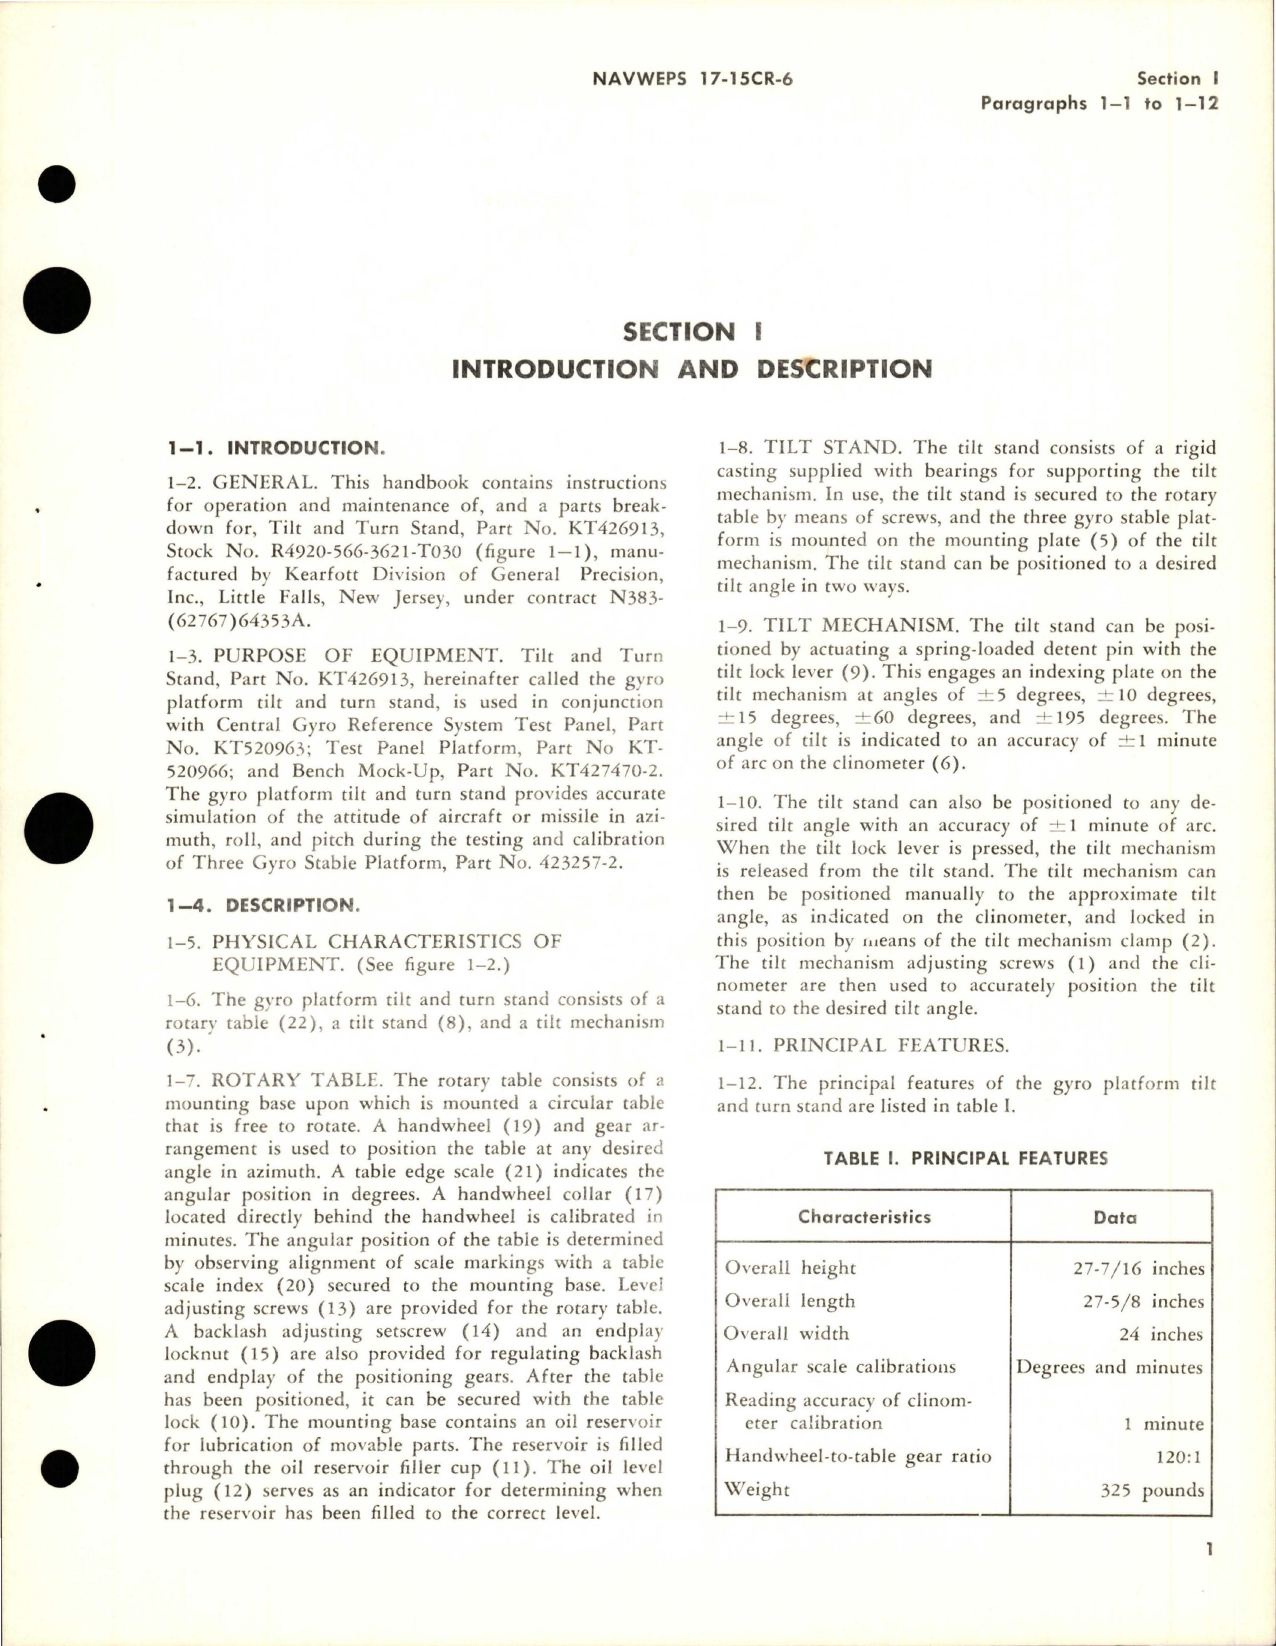 Sample page 5 from AirCorps Library document: Operation and Service Instructions with Illustrated Parts for Tilt and Turn Stand - Part KT426913